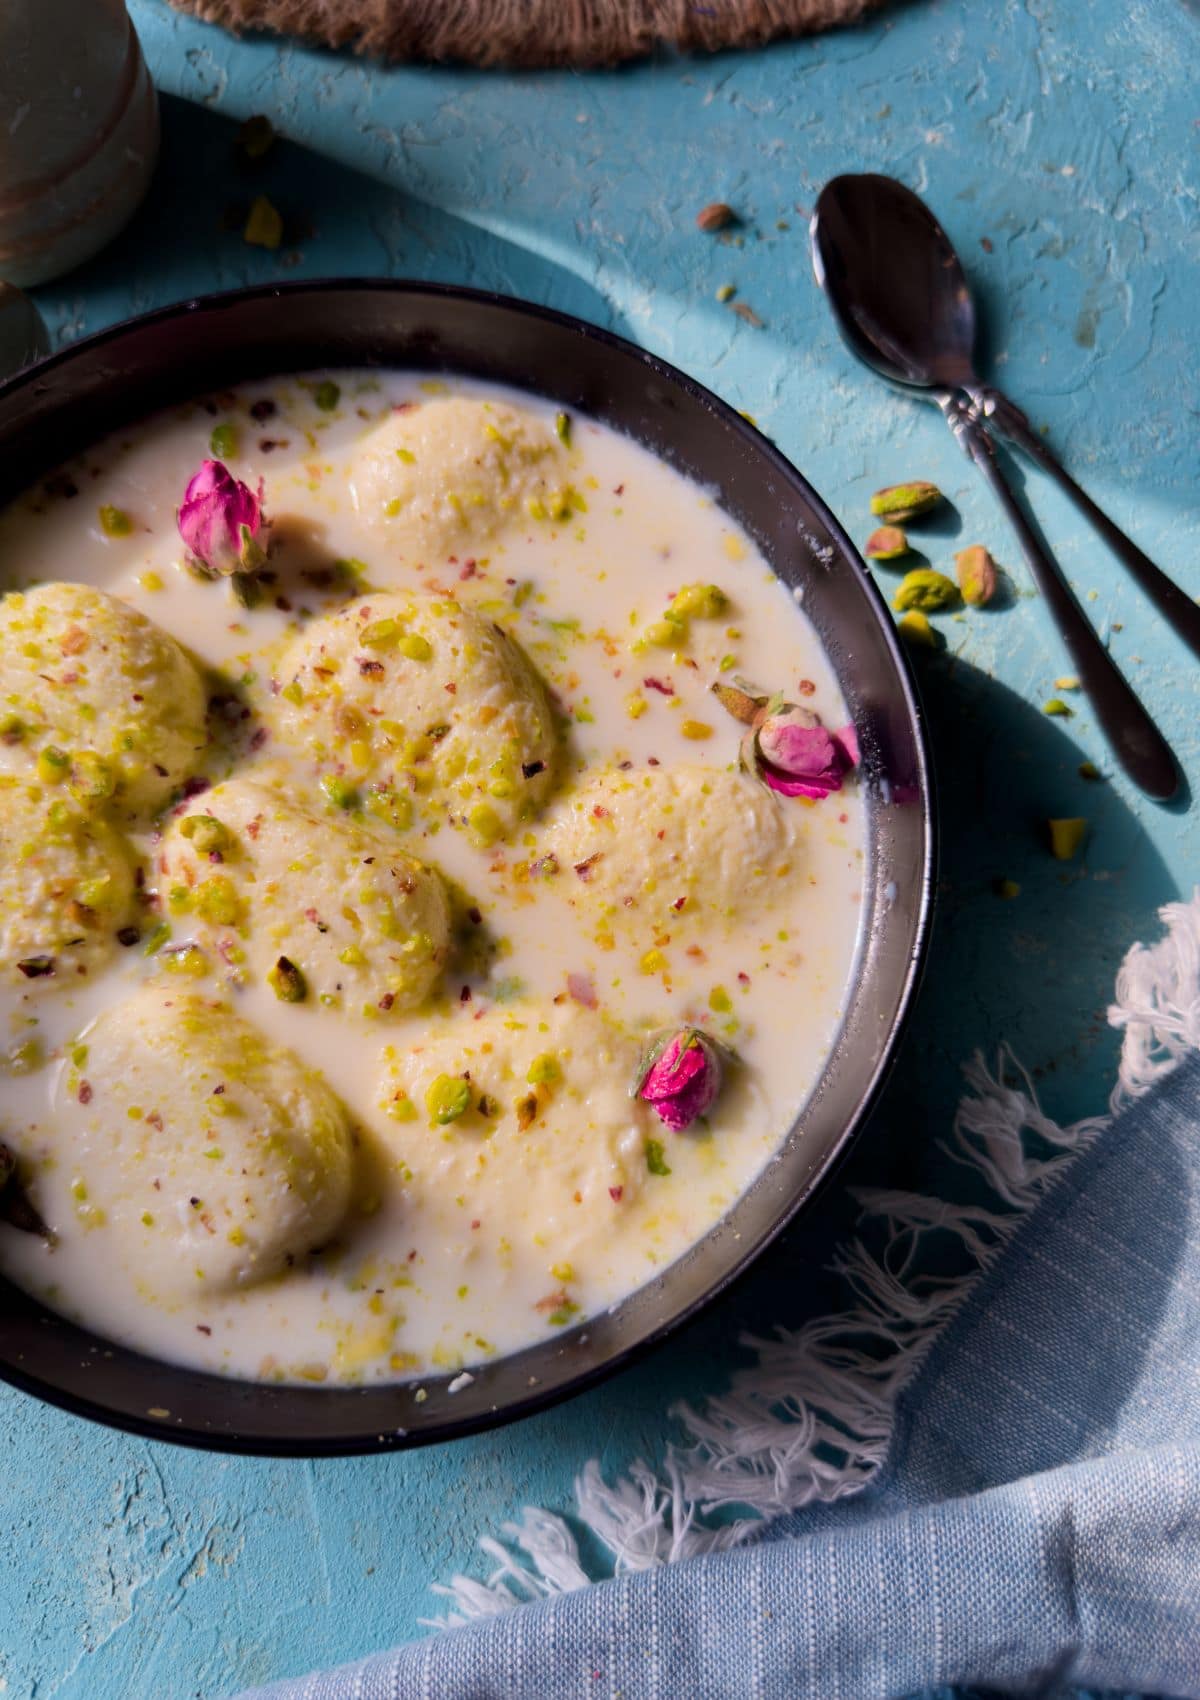 garnished rasmalai served in black deep plate with spoons on the side.